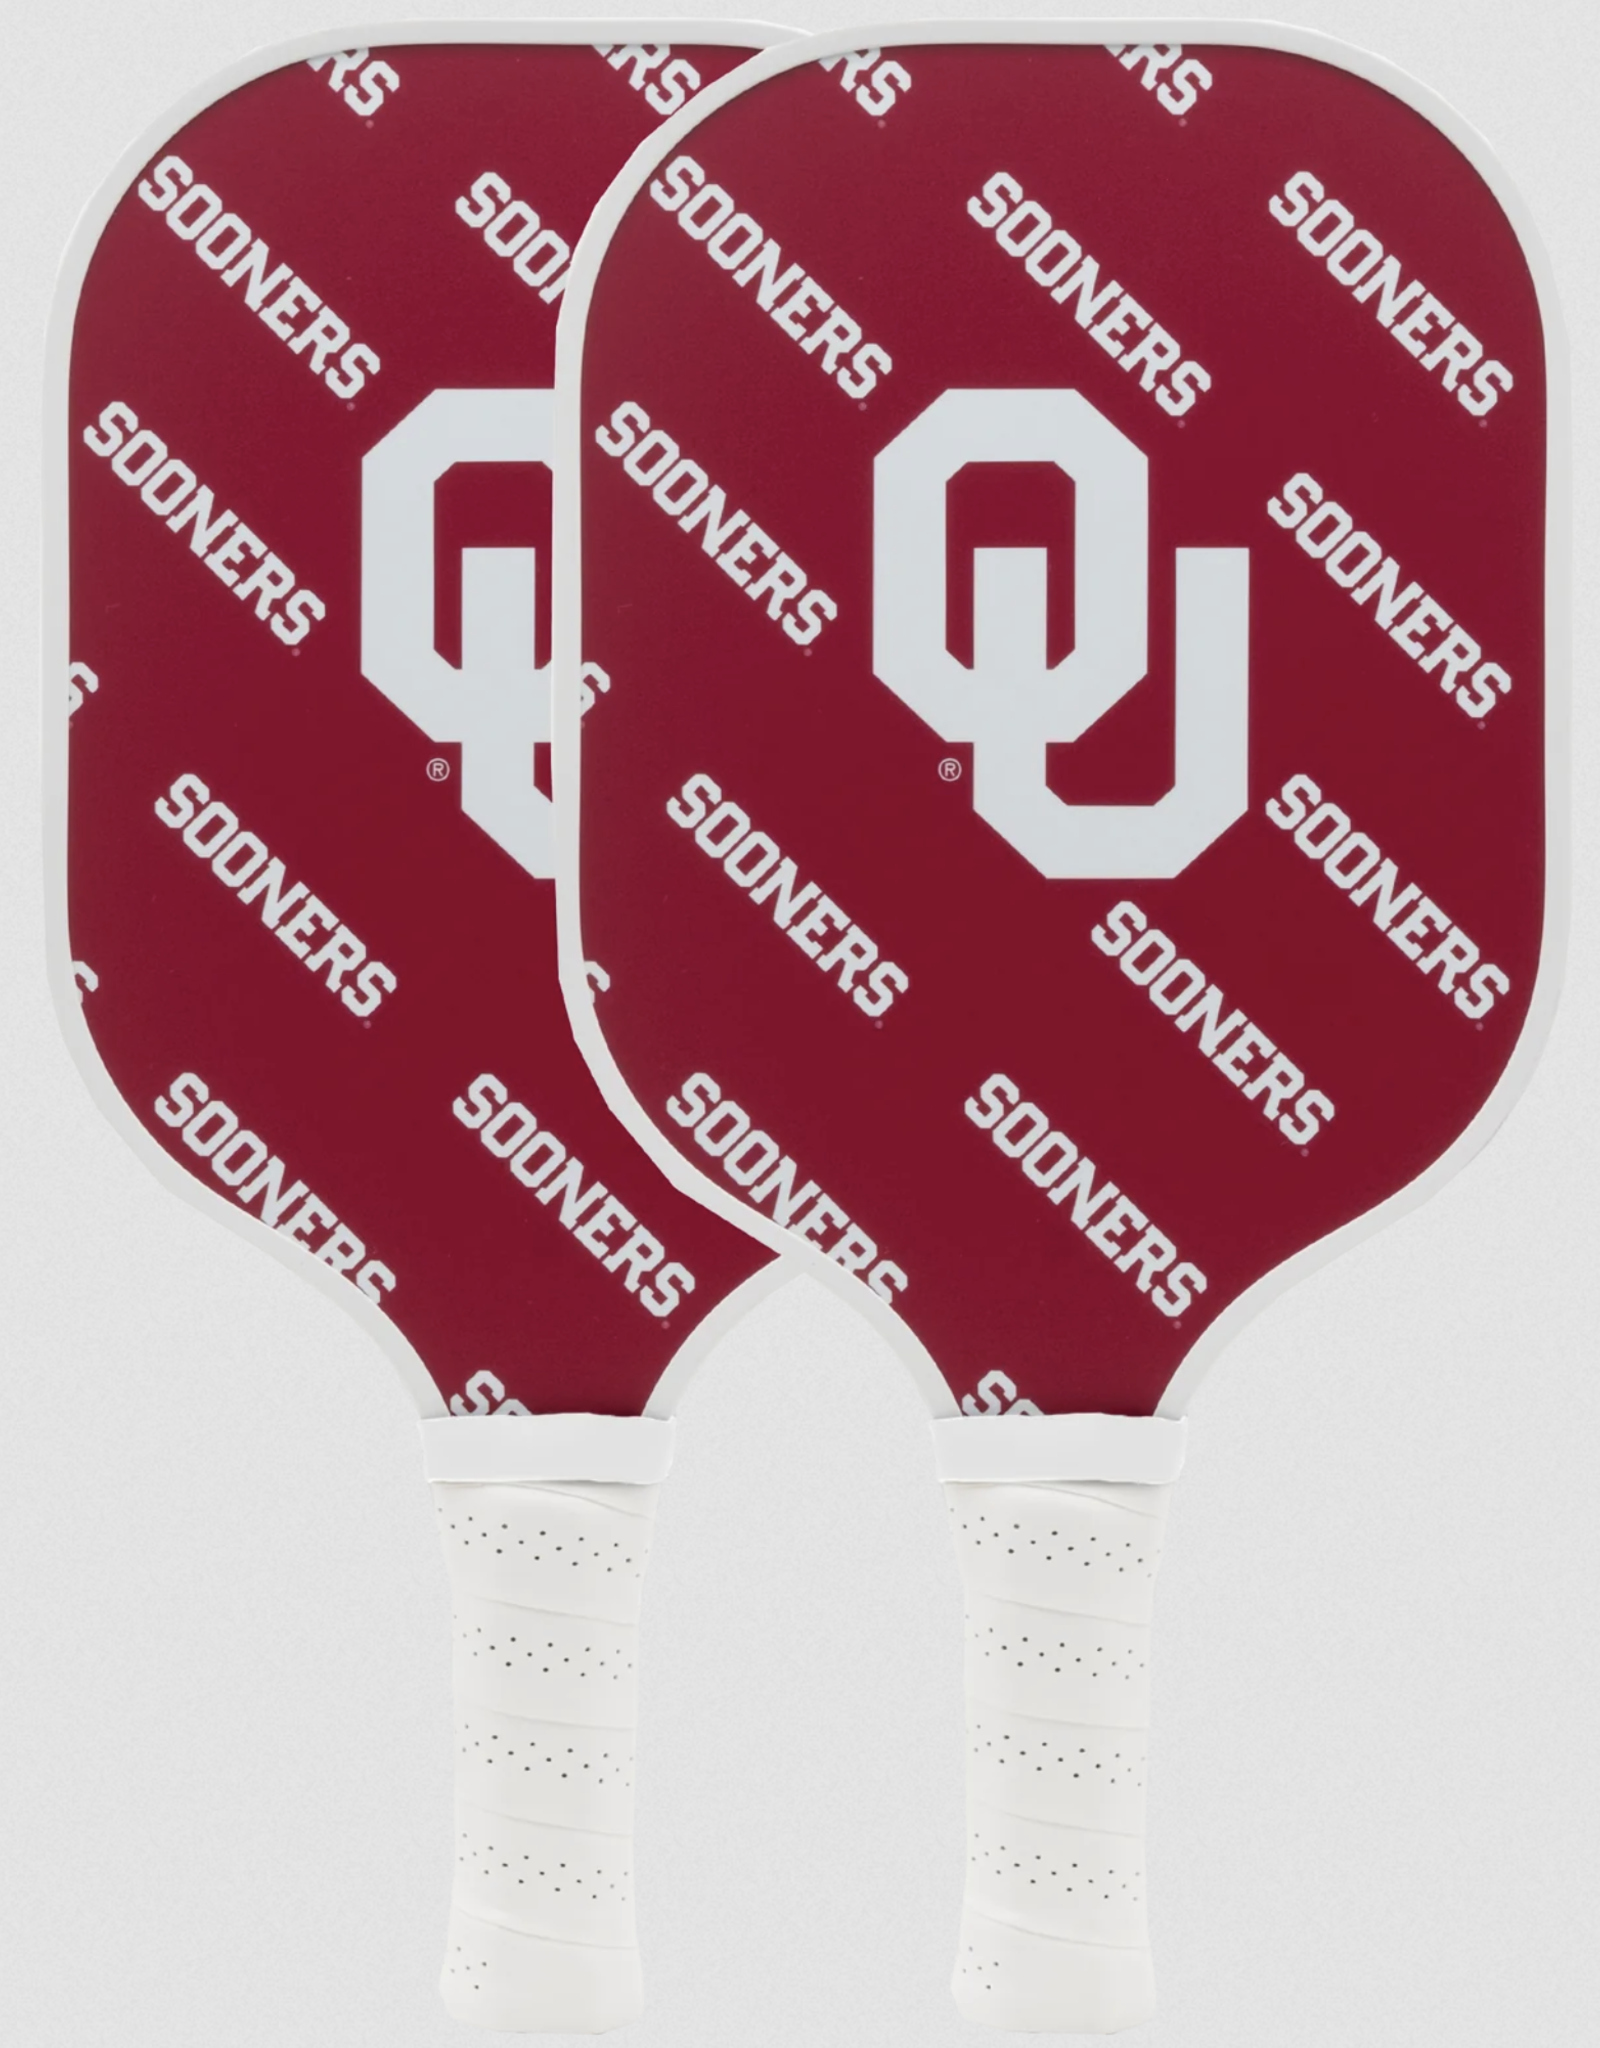 Parrot OU Pickleball Paddle Set w/ Clear Top Case